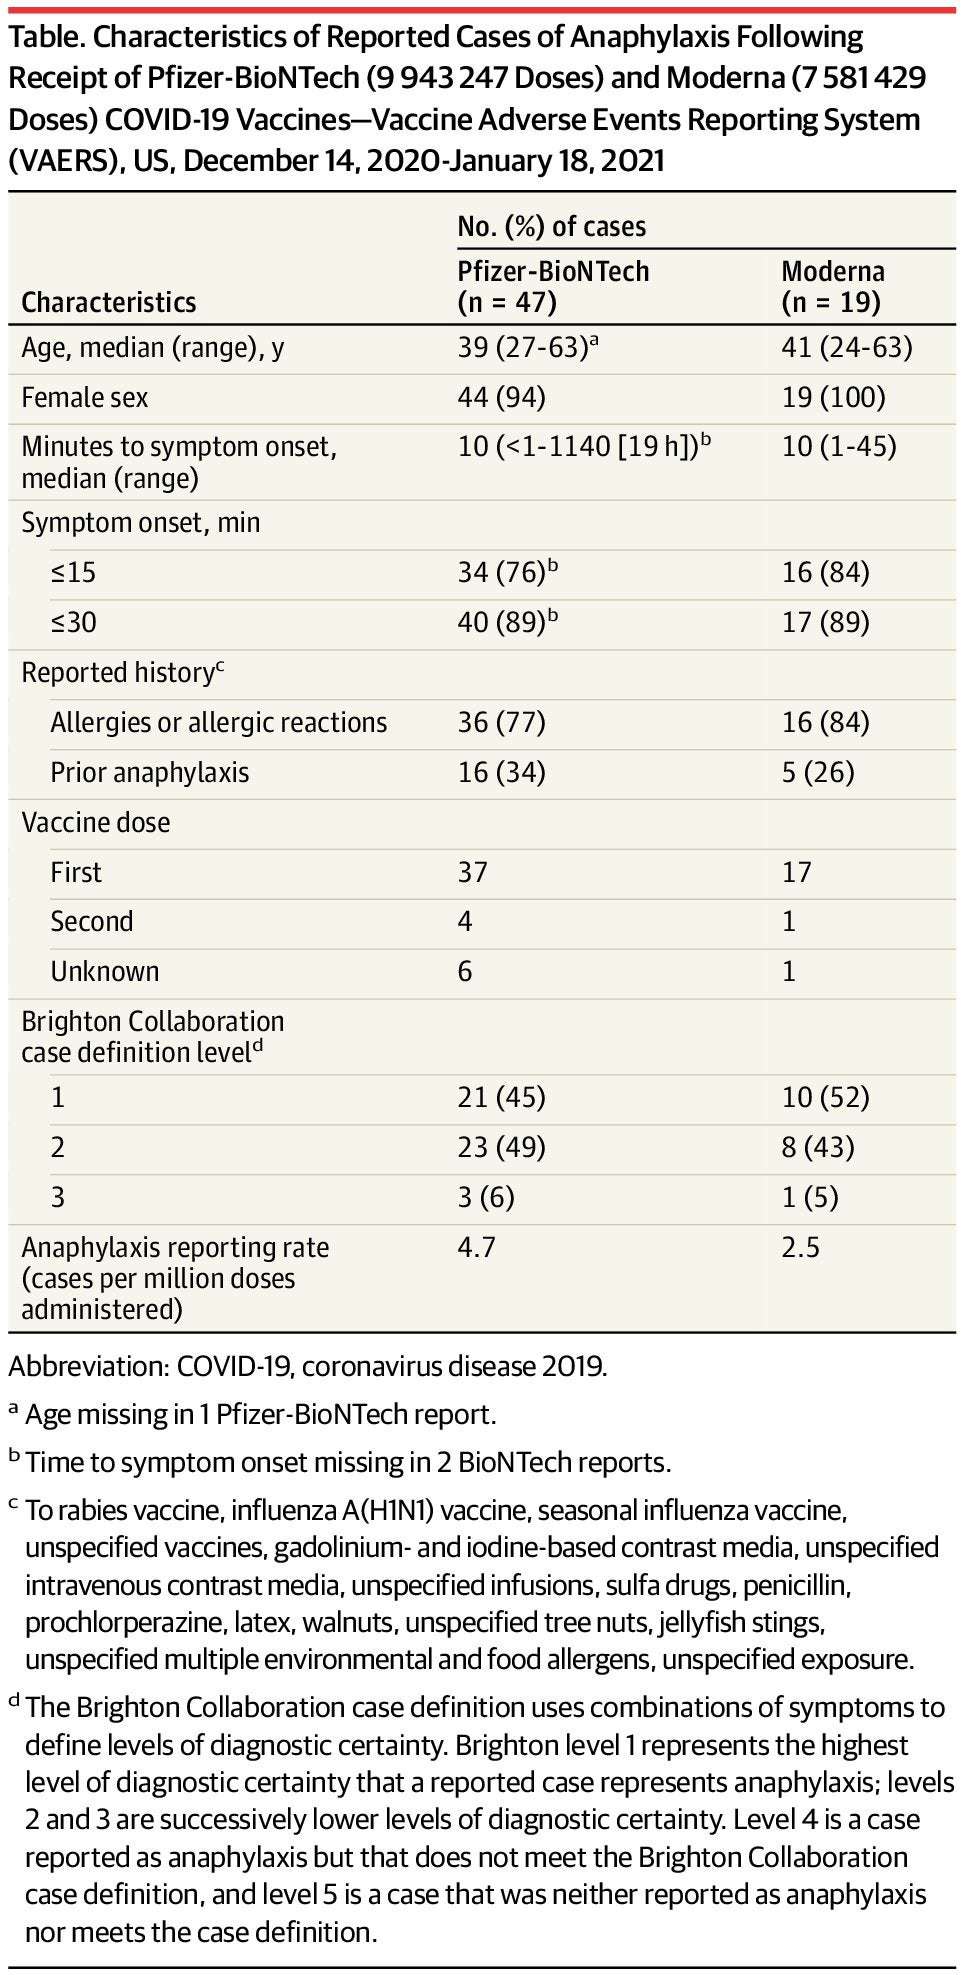 image for Reports of Anaphylaxis After Receipt of mRNA COVID-19 Vaccines in the US—December 14, 2020-January 18, 2021